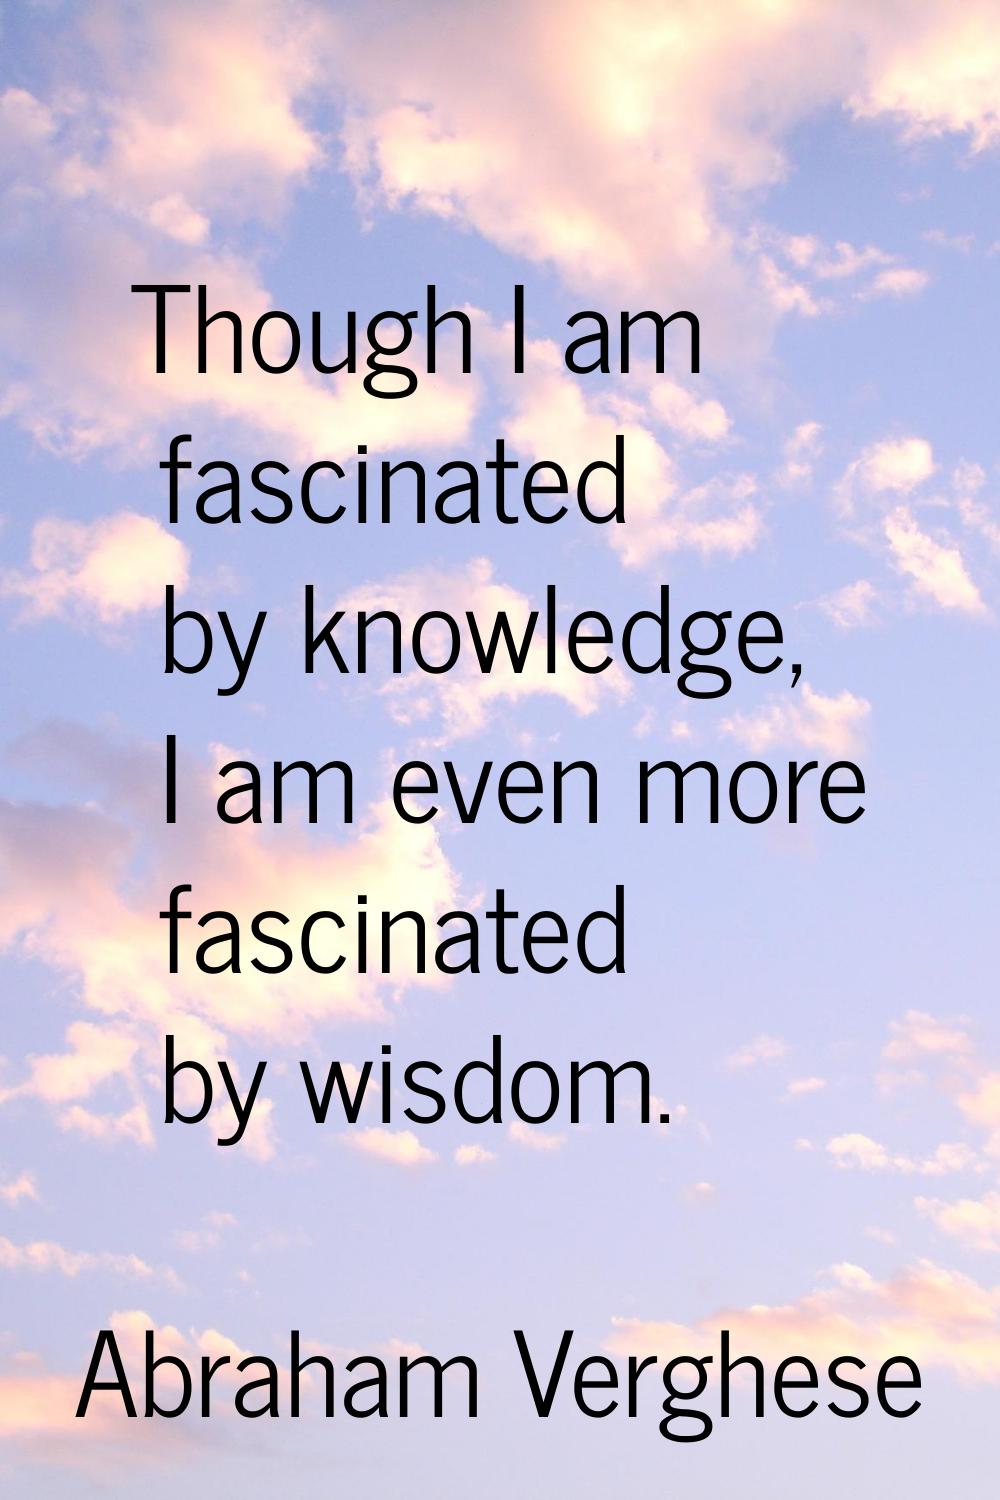 Though I am fascinated by knowledge, I am even more fascinated by wisdom.